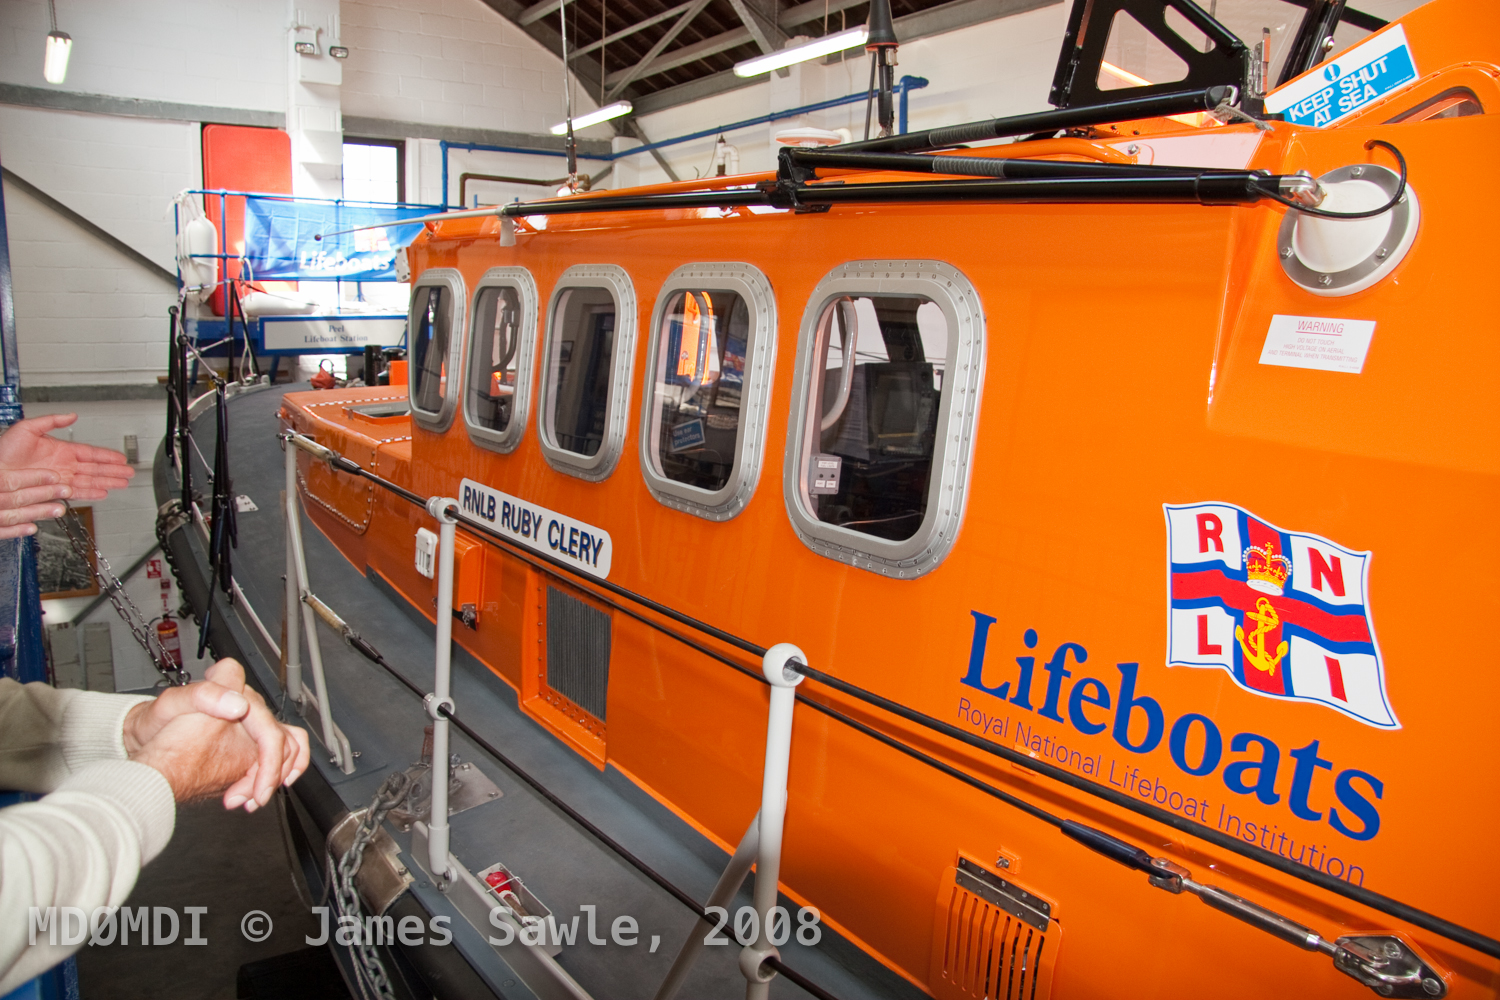 The Peel lifeboat looking very clean and polished in its shed…